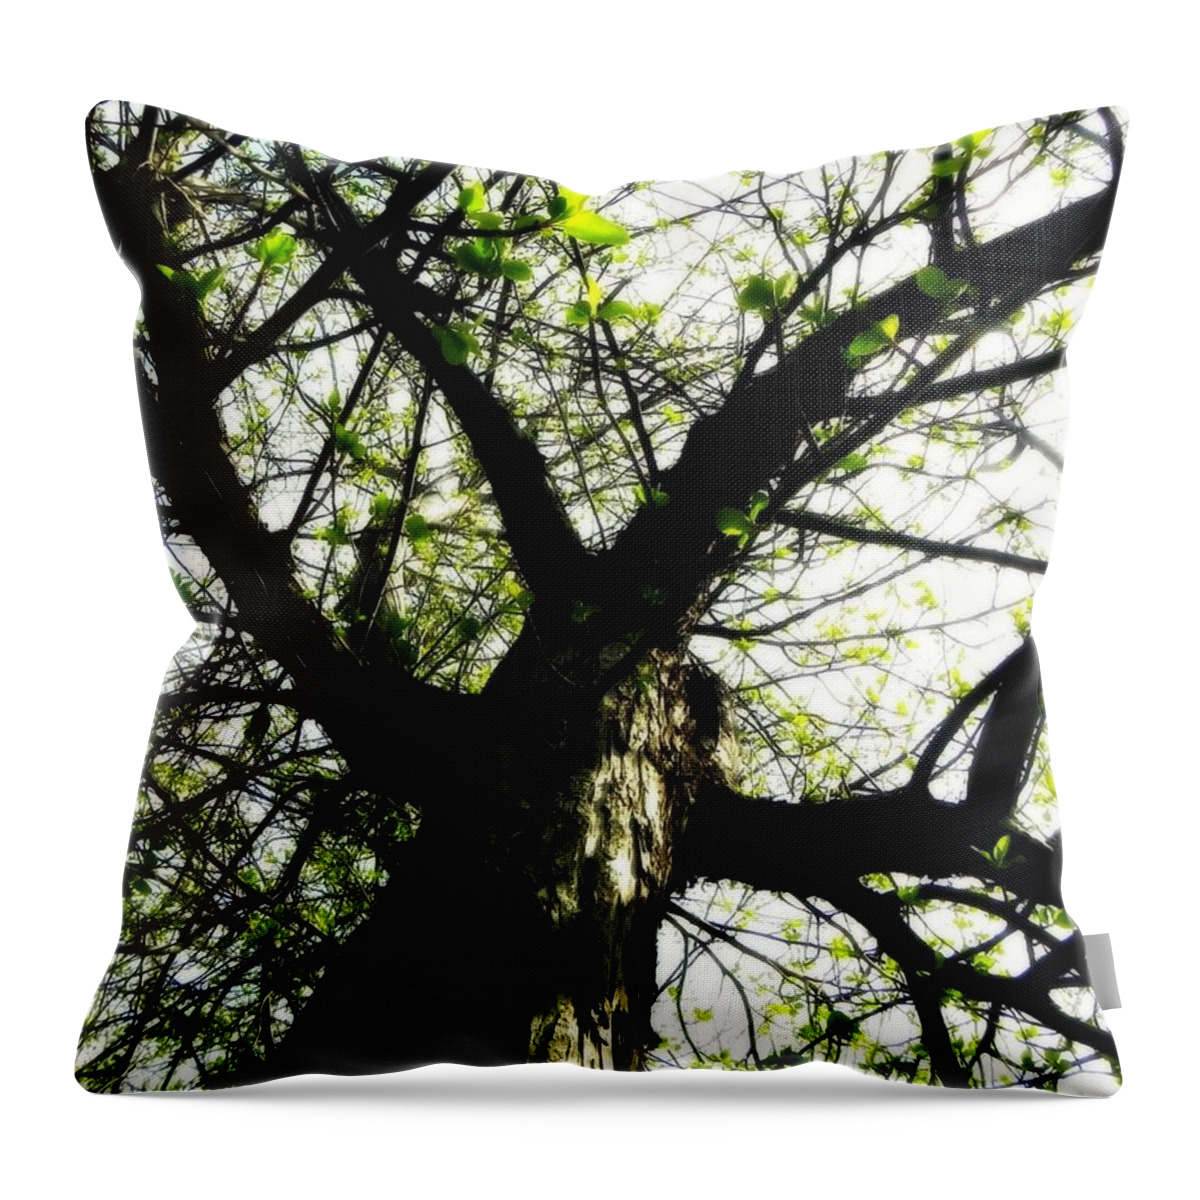 Leaves Throw Pillow featuring the photograph New Leaves by Amanda R Wright